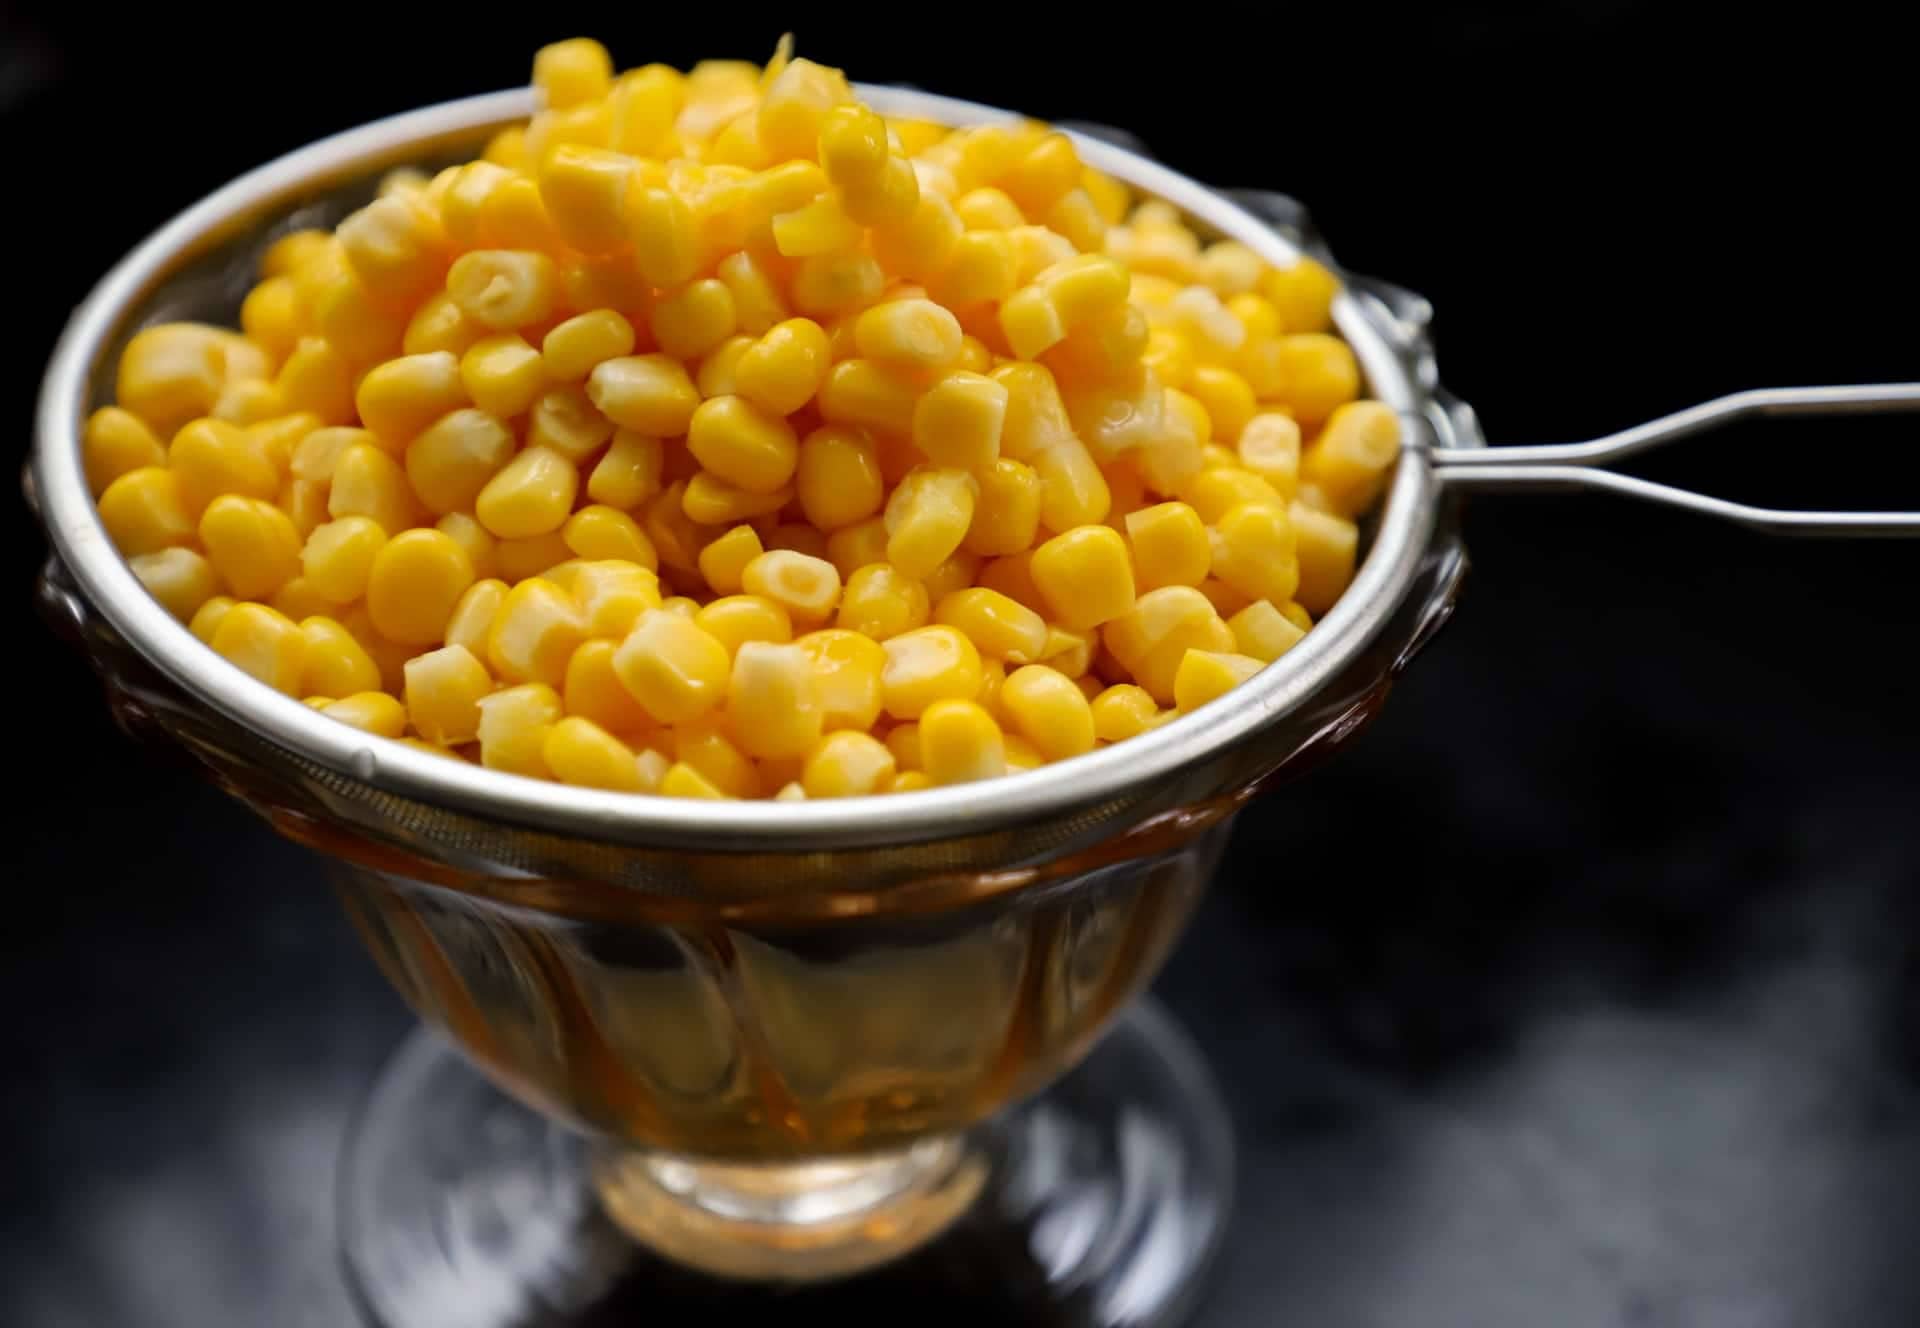 how long is canned corn good for in the fridge